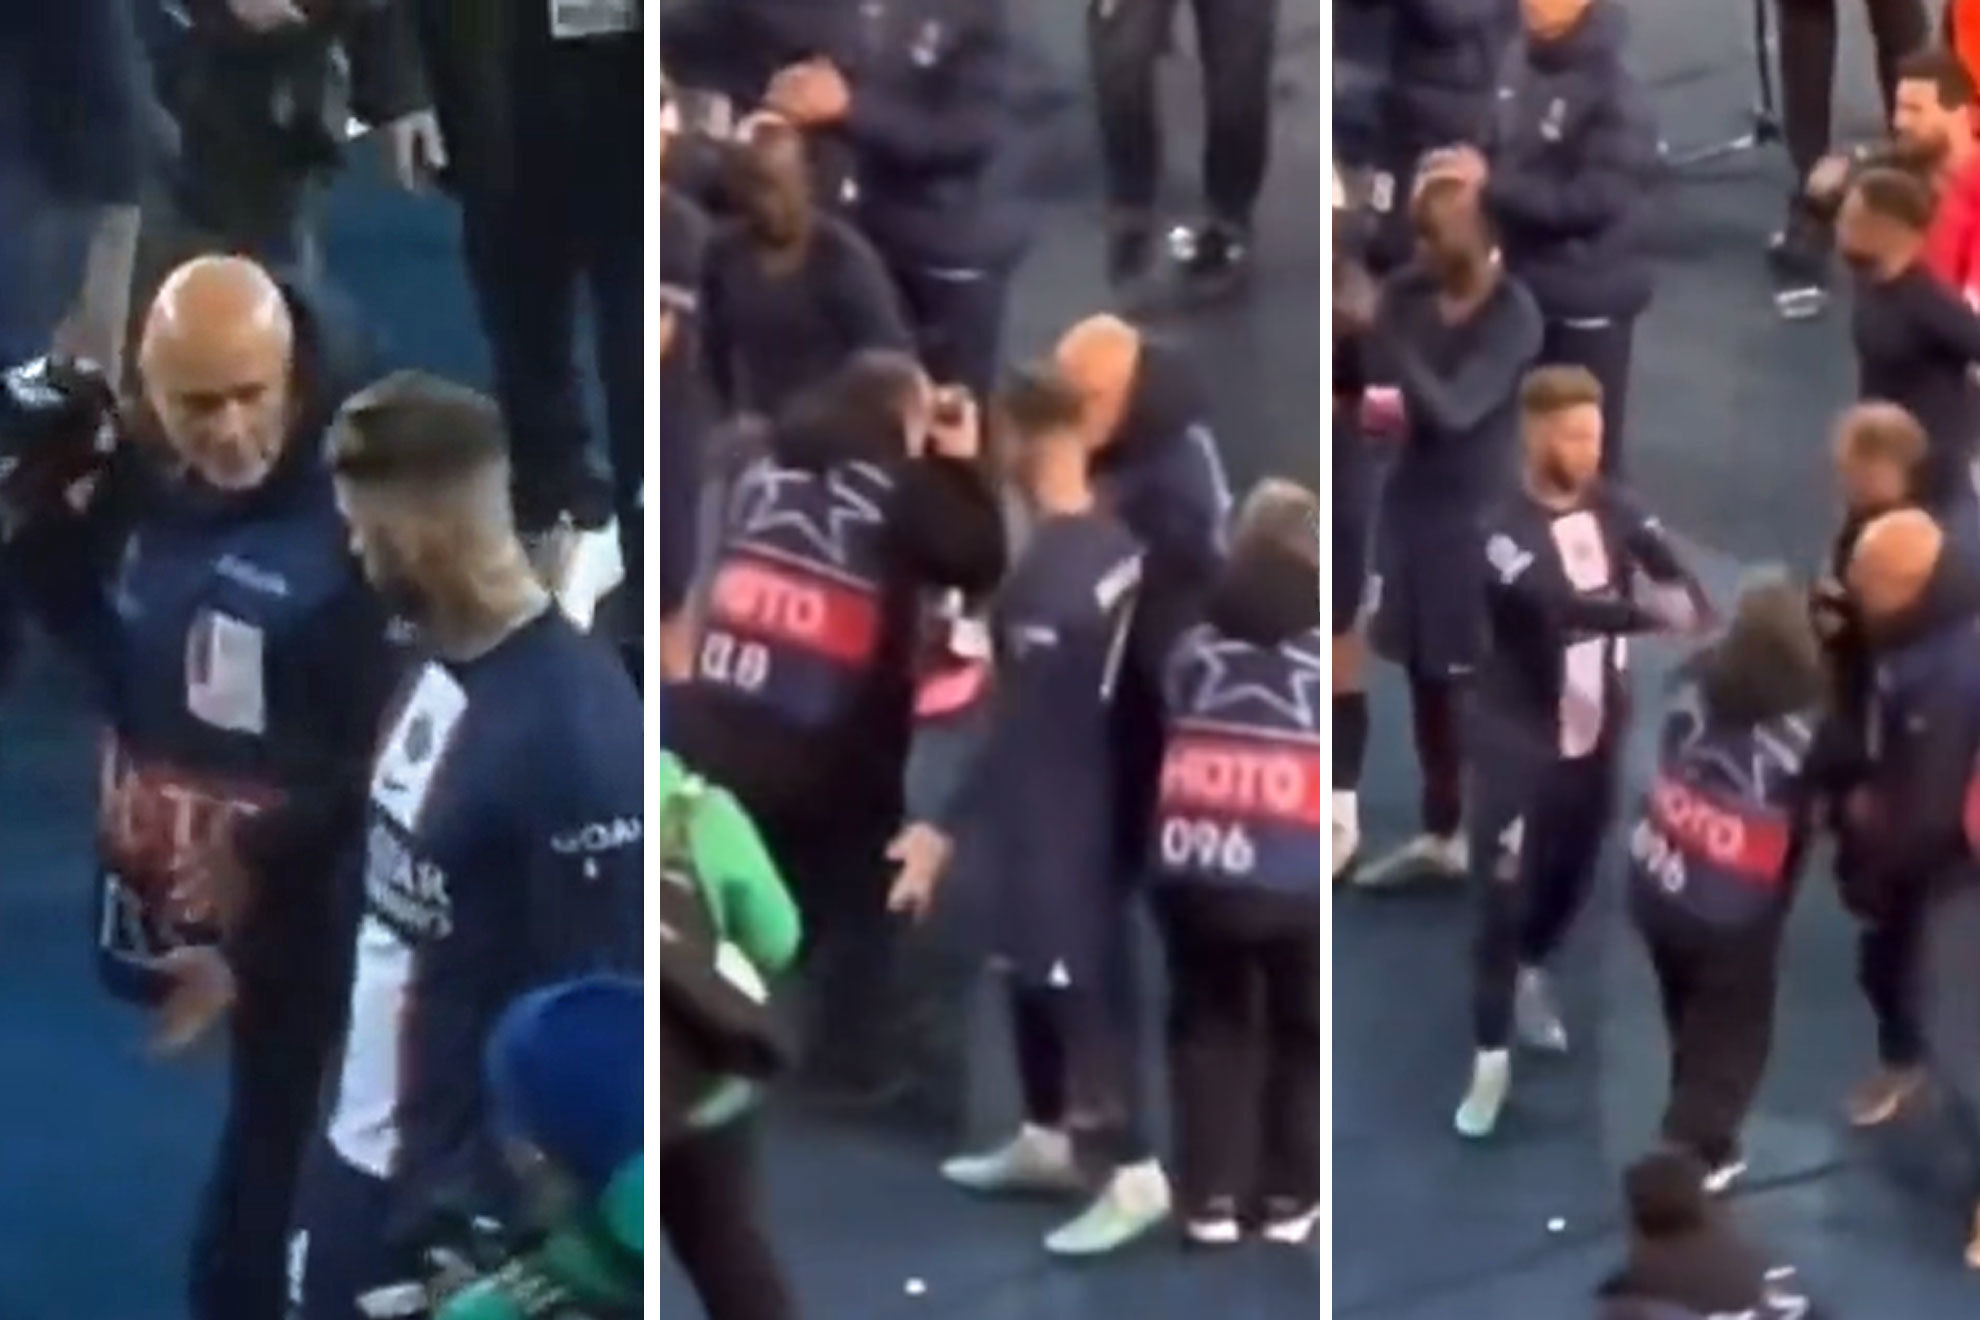 Sergio Ramos loses his temper with two photographers and ends up pushing one